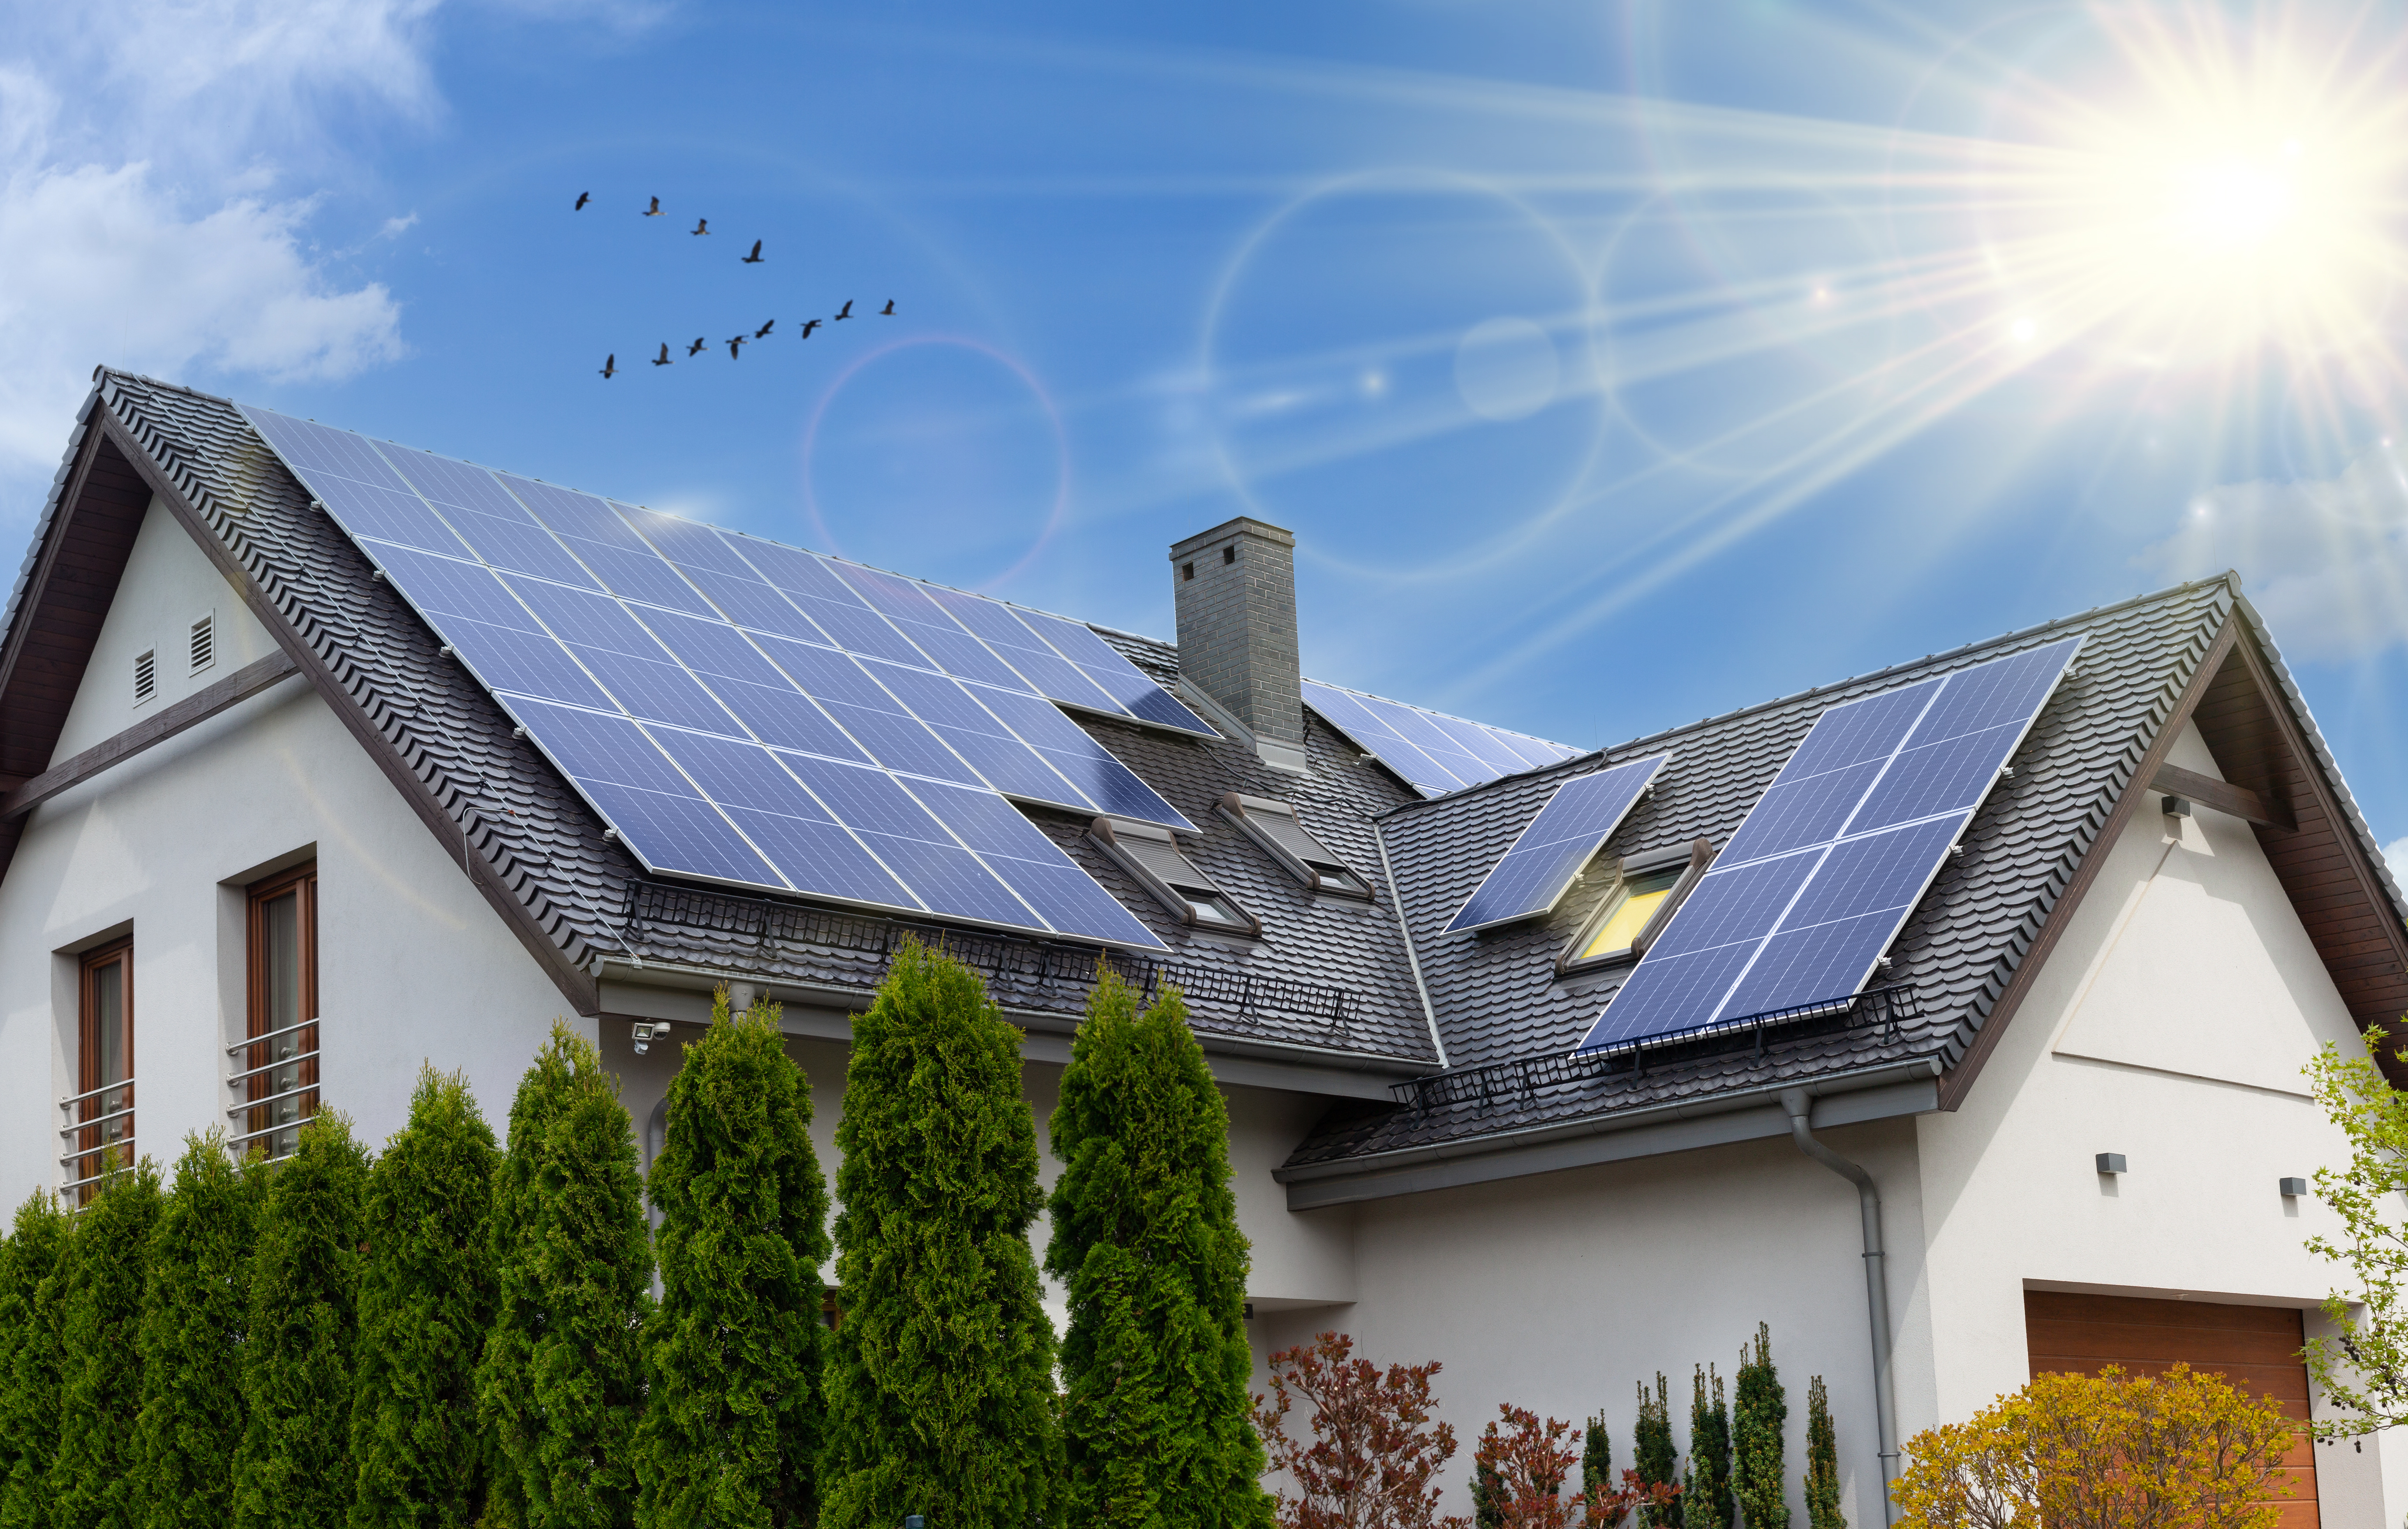 Read: Solar Panel Financing Options for Homeowners